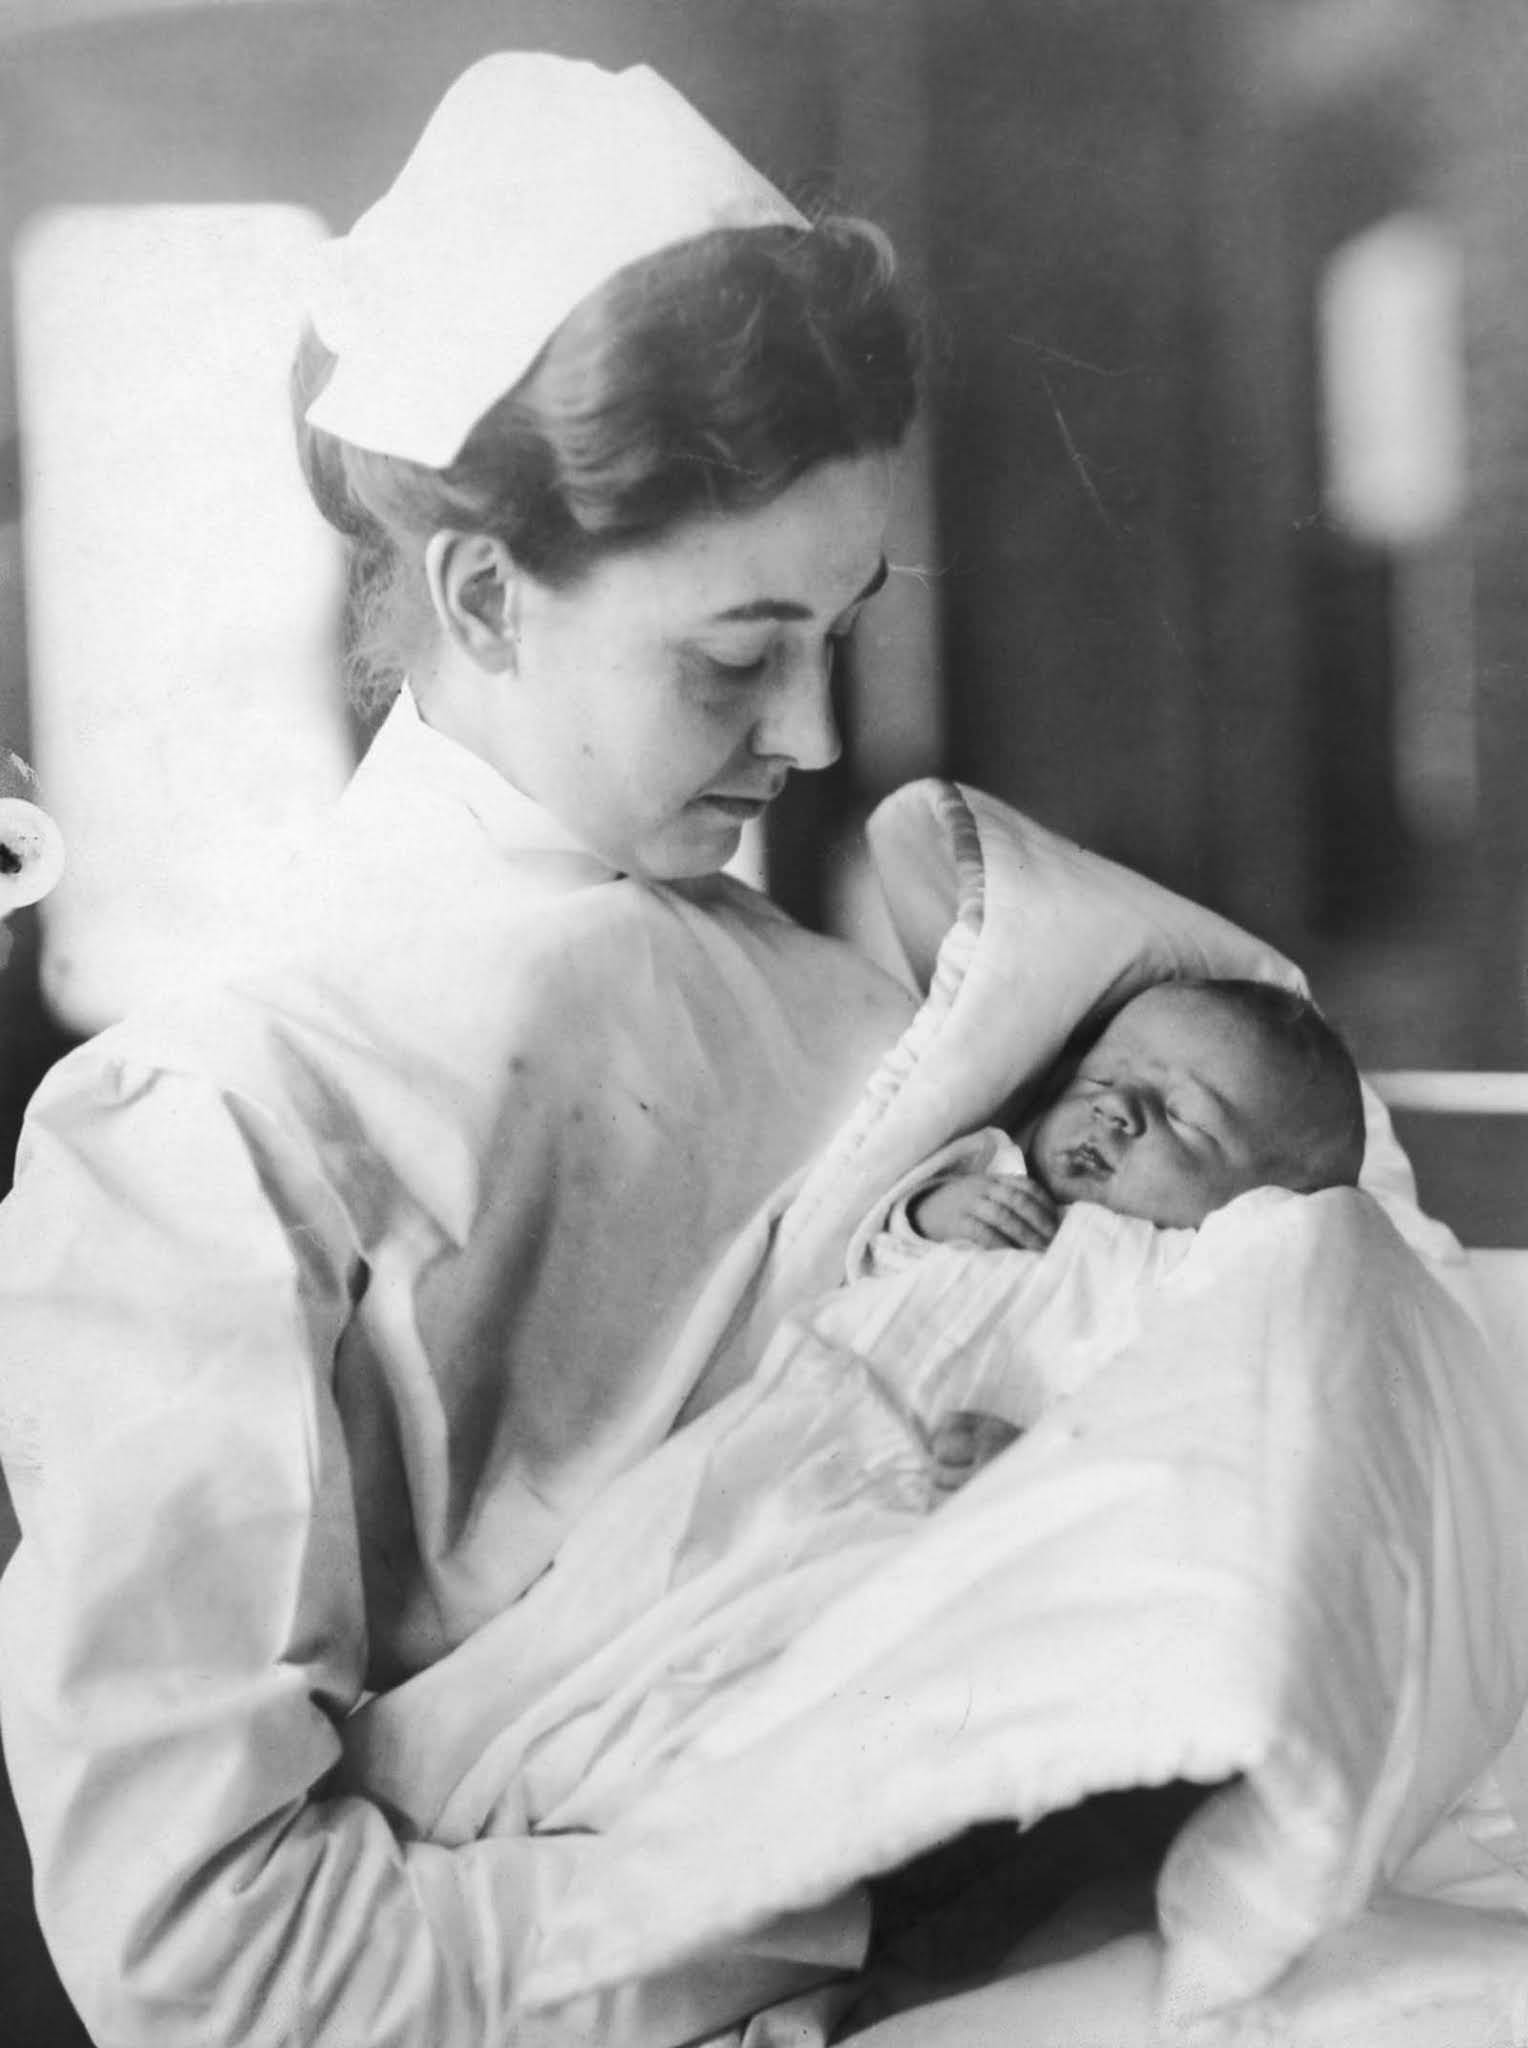 A nurse holds newborn Lucien P. Smith, Jr. His mother Eloise was pregnant with him while returning from her honeymoon aboard the Titanic. Lucien’s father died in the disaster.